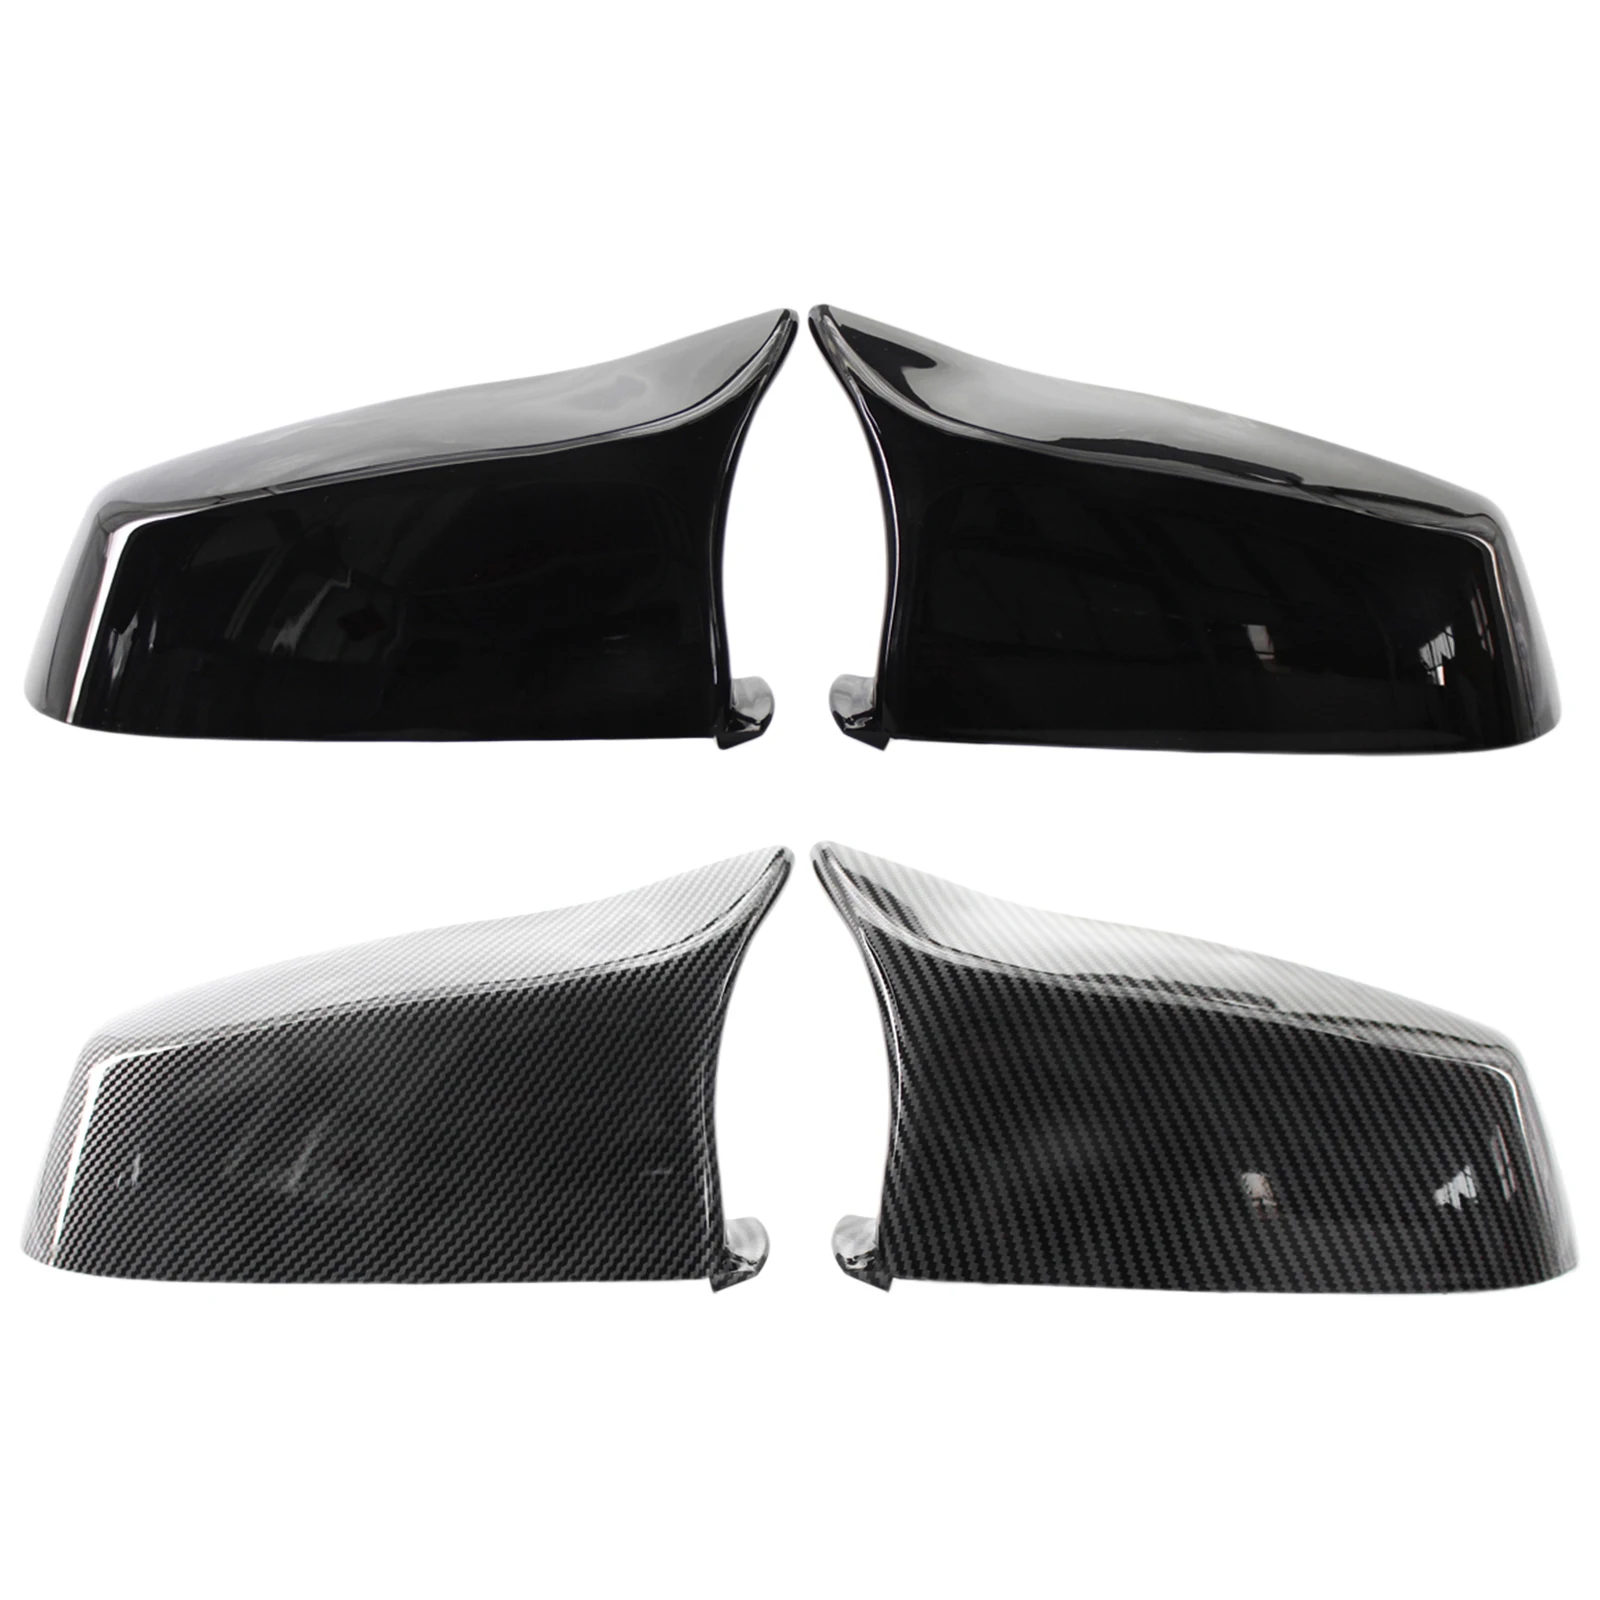 2x Car Rearview Mirror Cover Trim Replace Style For BMW E60 E61 F01 F02